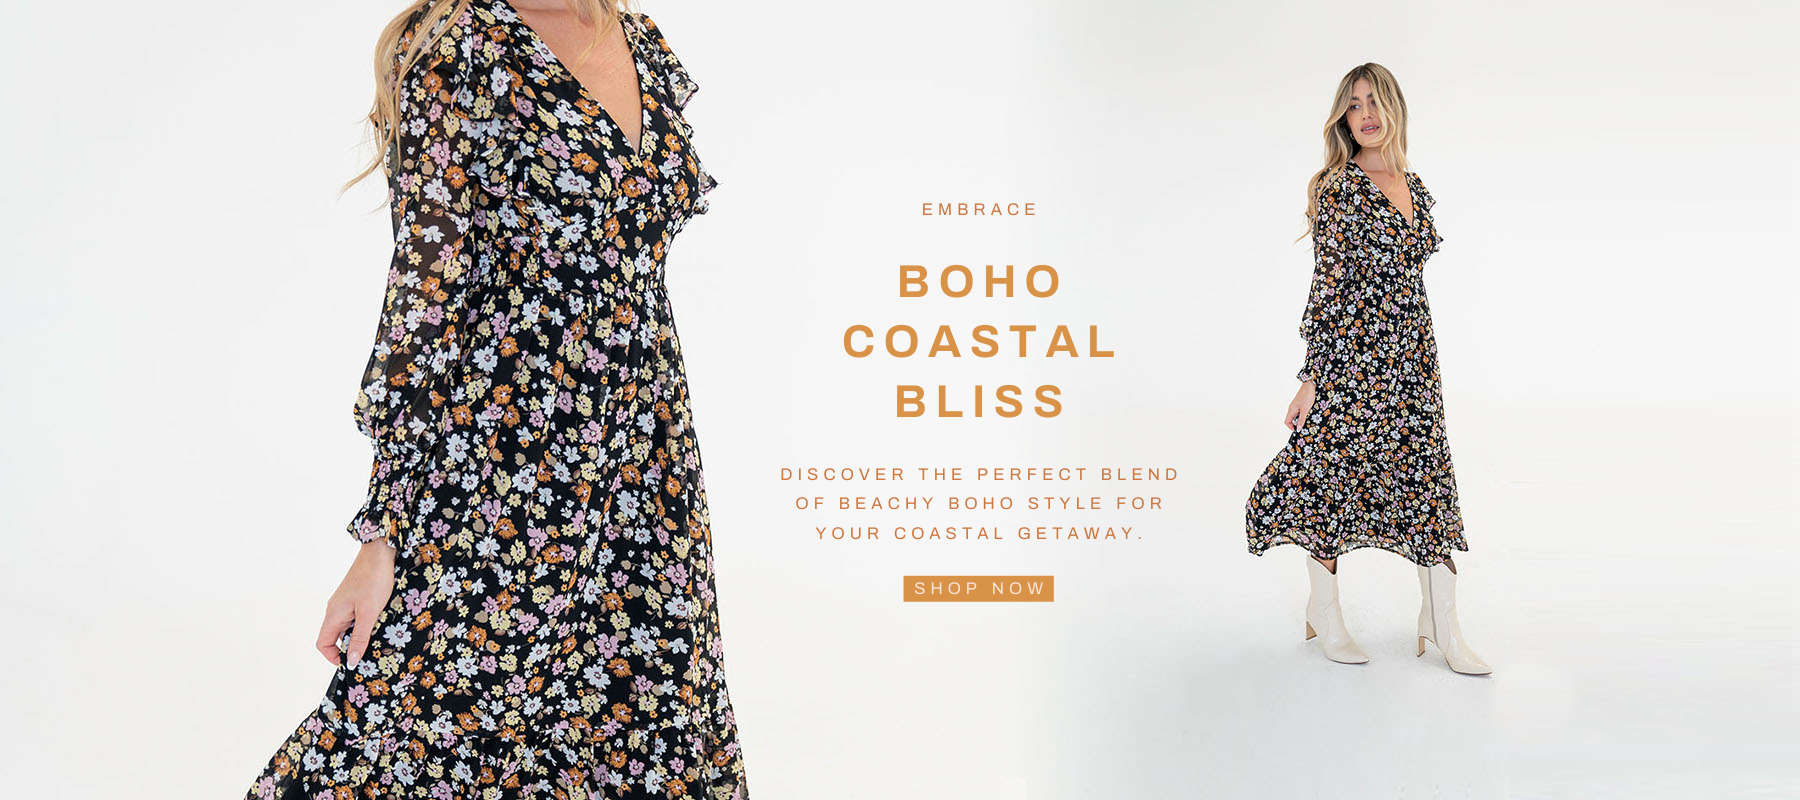 Embrace Boho Coastal Bliss - Discover the perfect blend of beachy boho style for your coastal getaway.